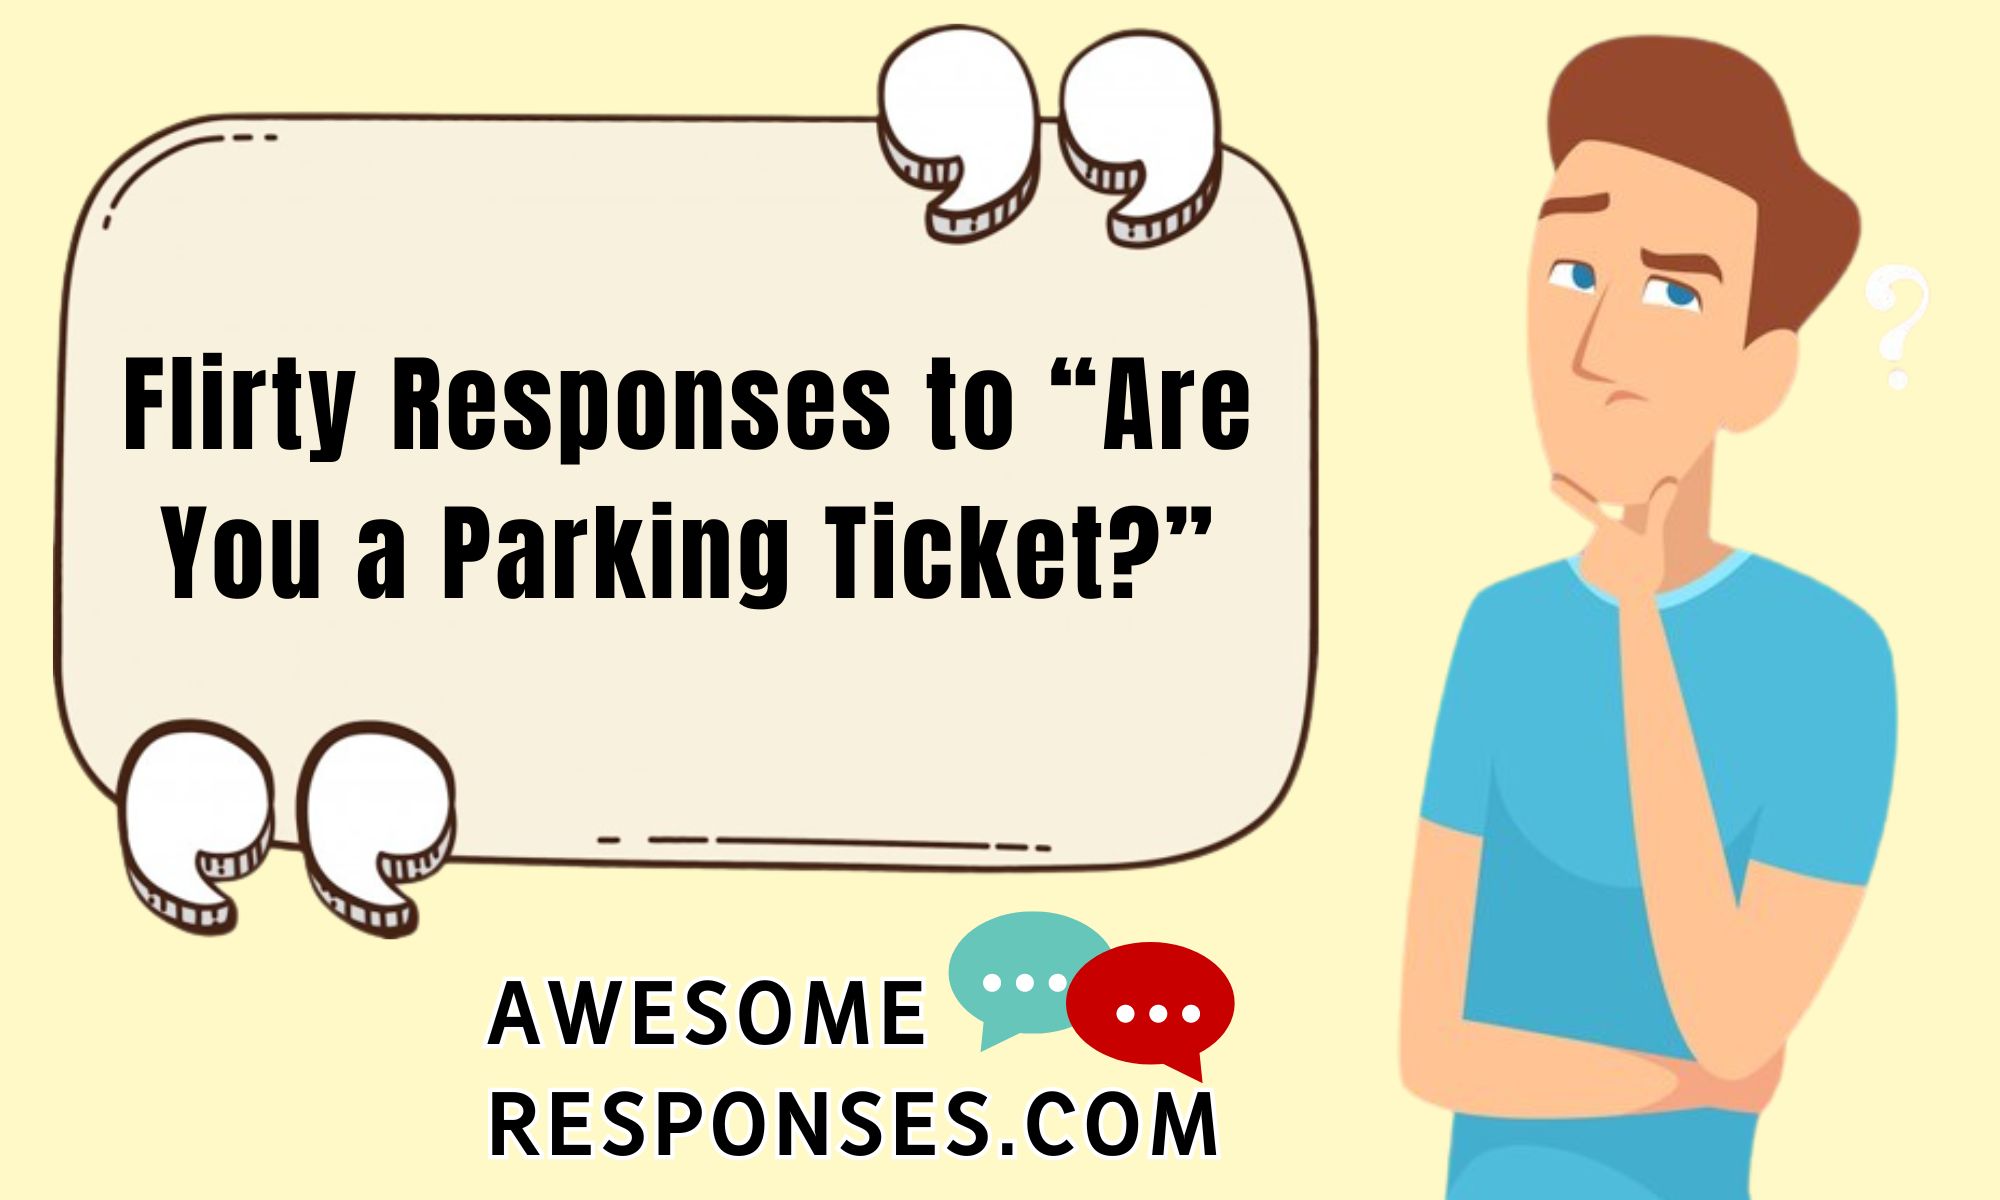 Flirty Responses to “Are You a Parking Ticket?”